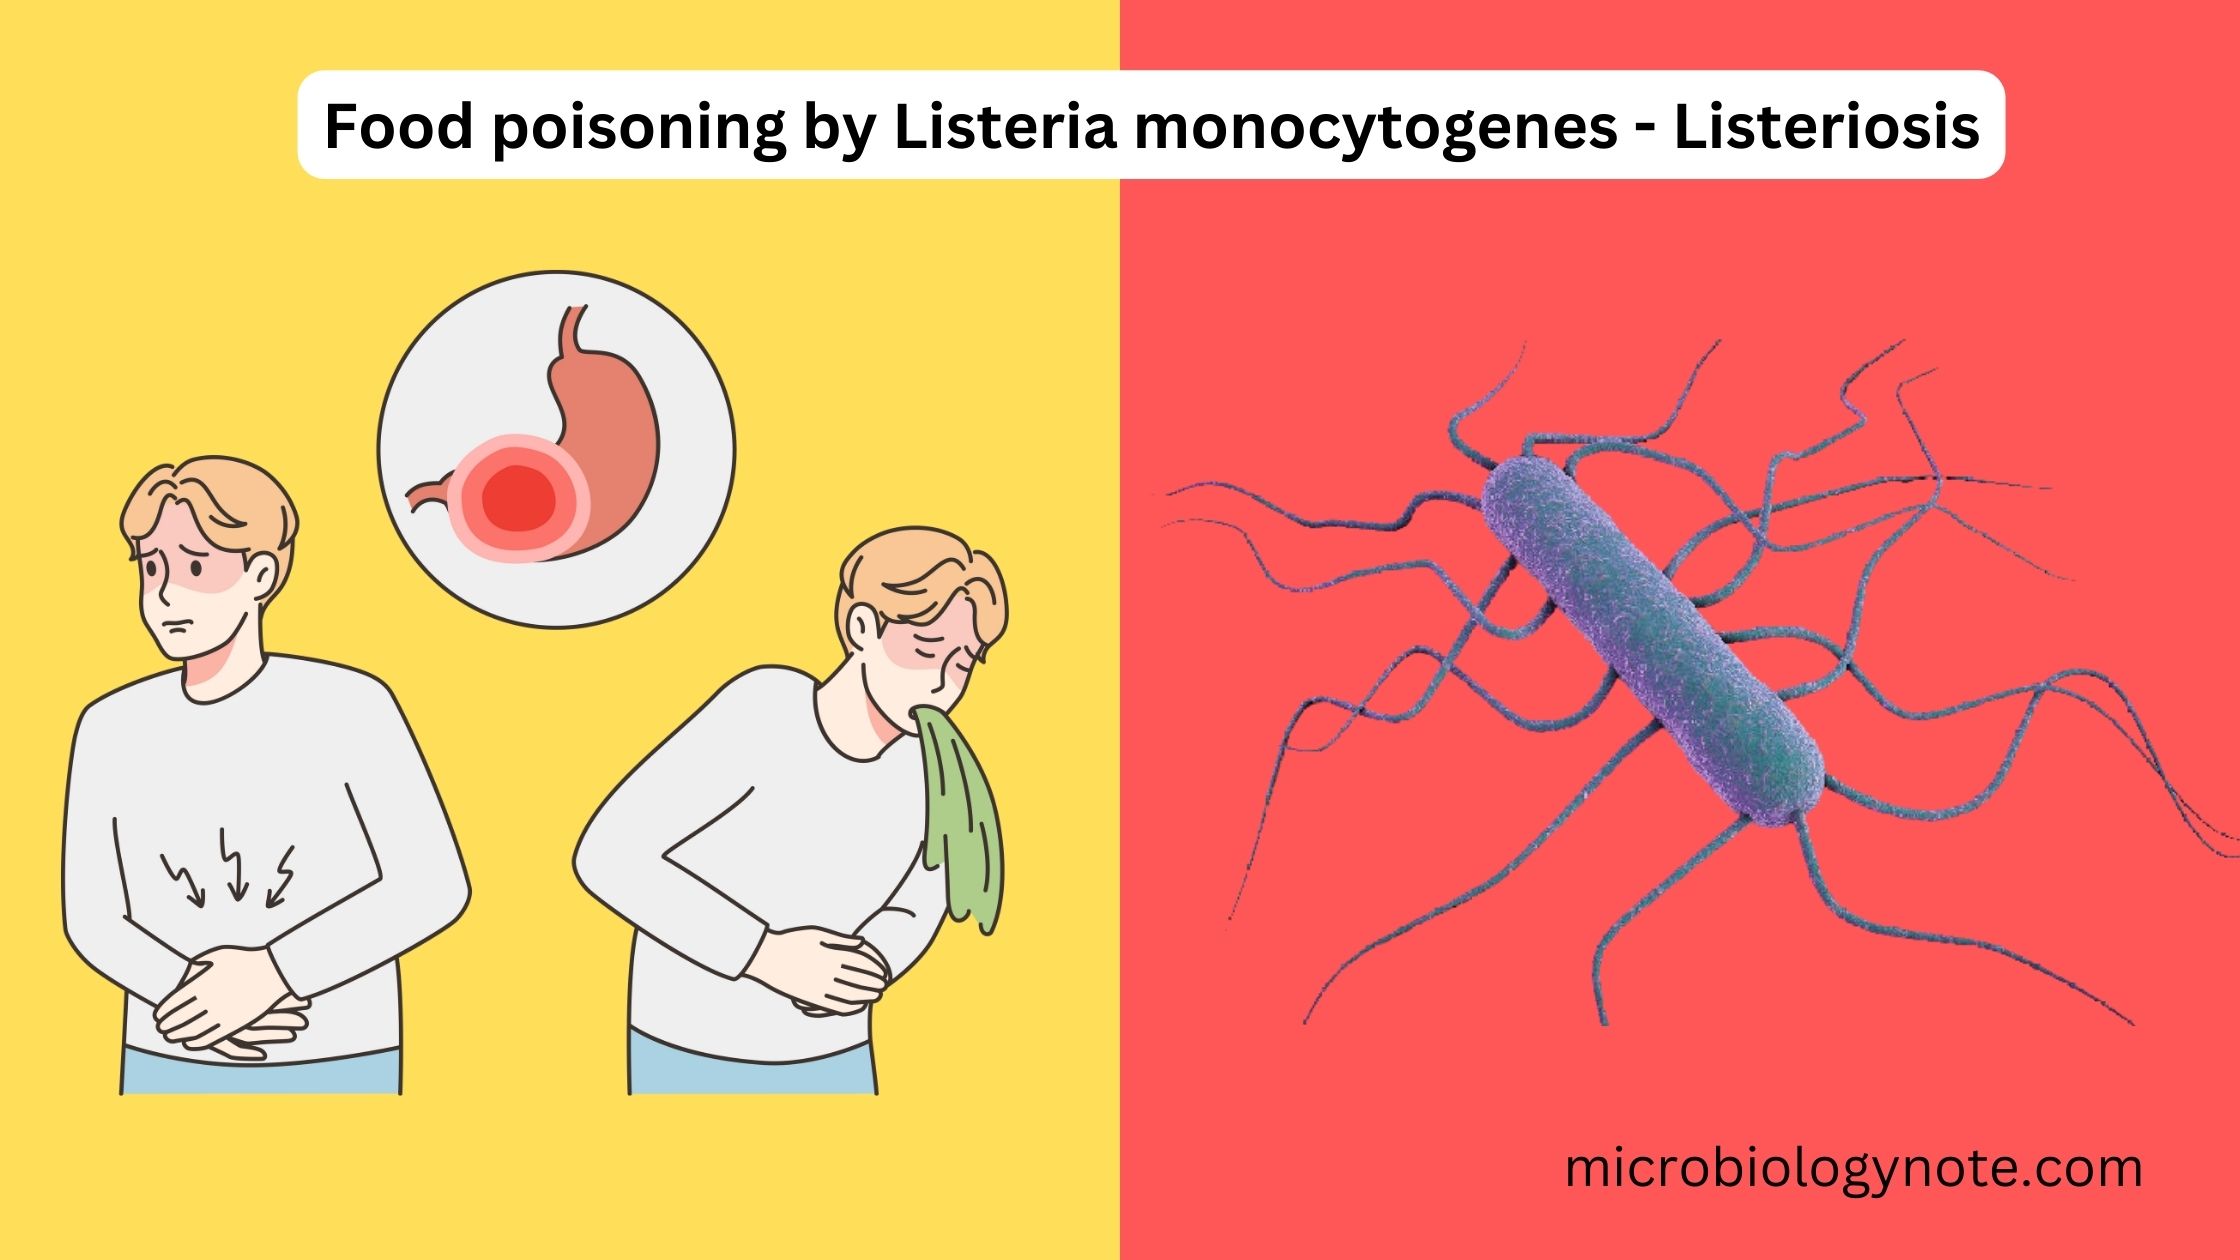 Food poisoning by Listeria monocytogenes - Listeriosis